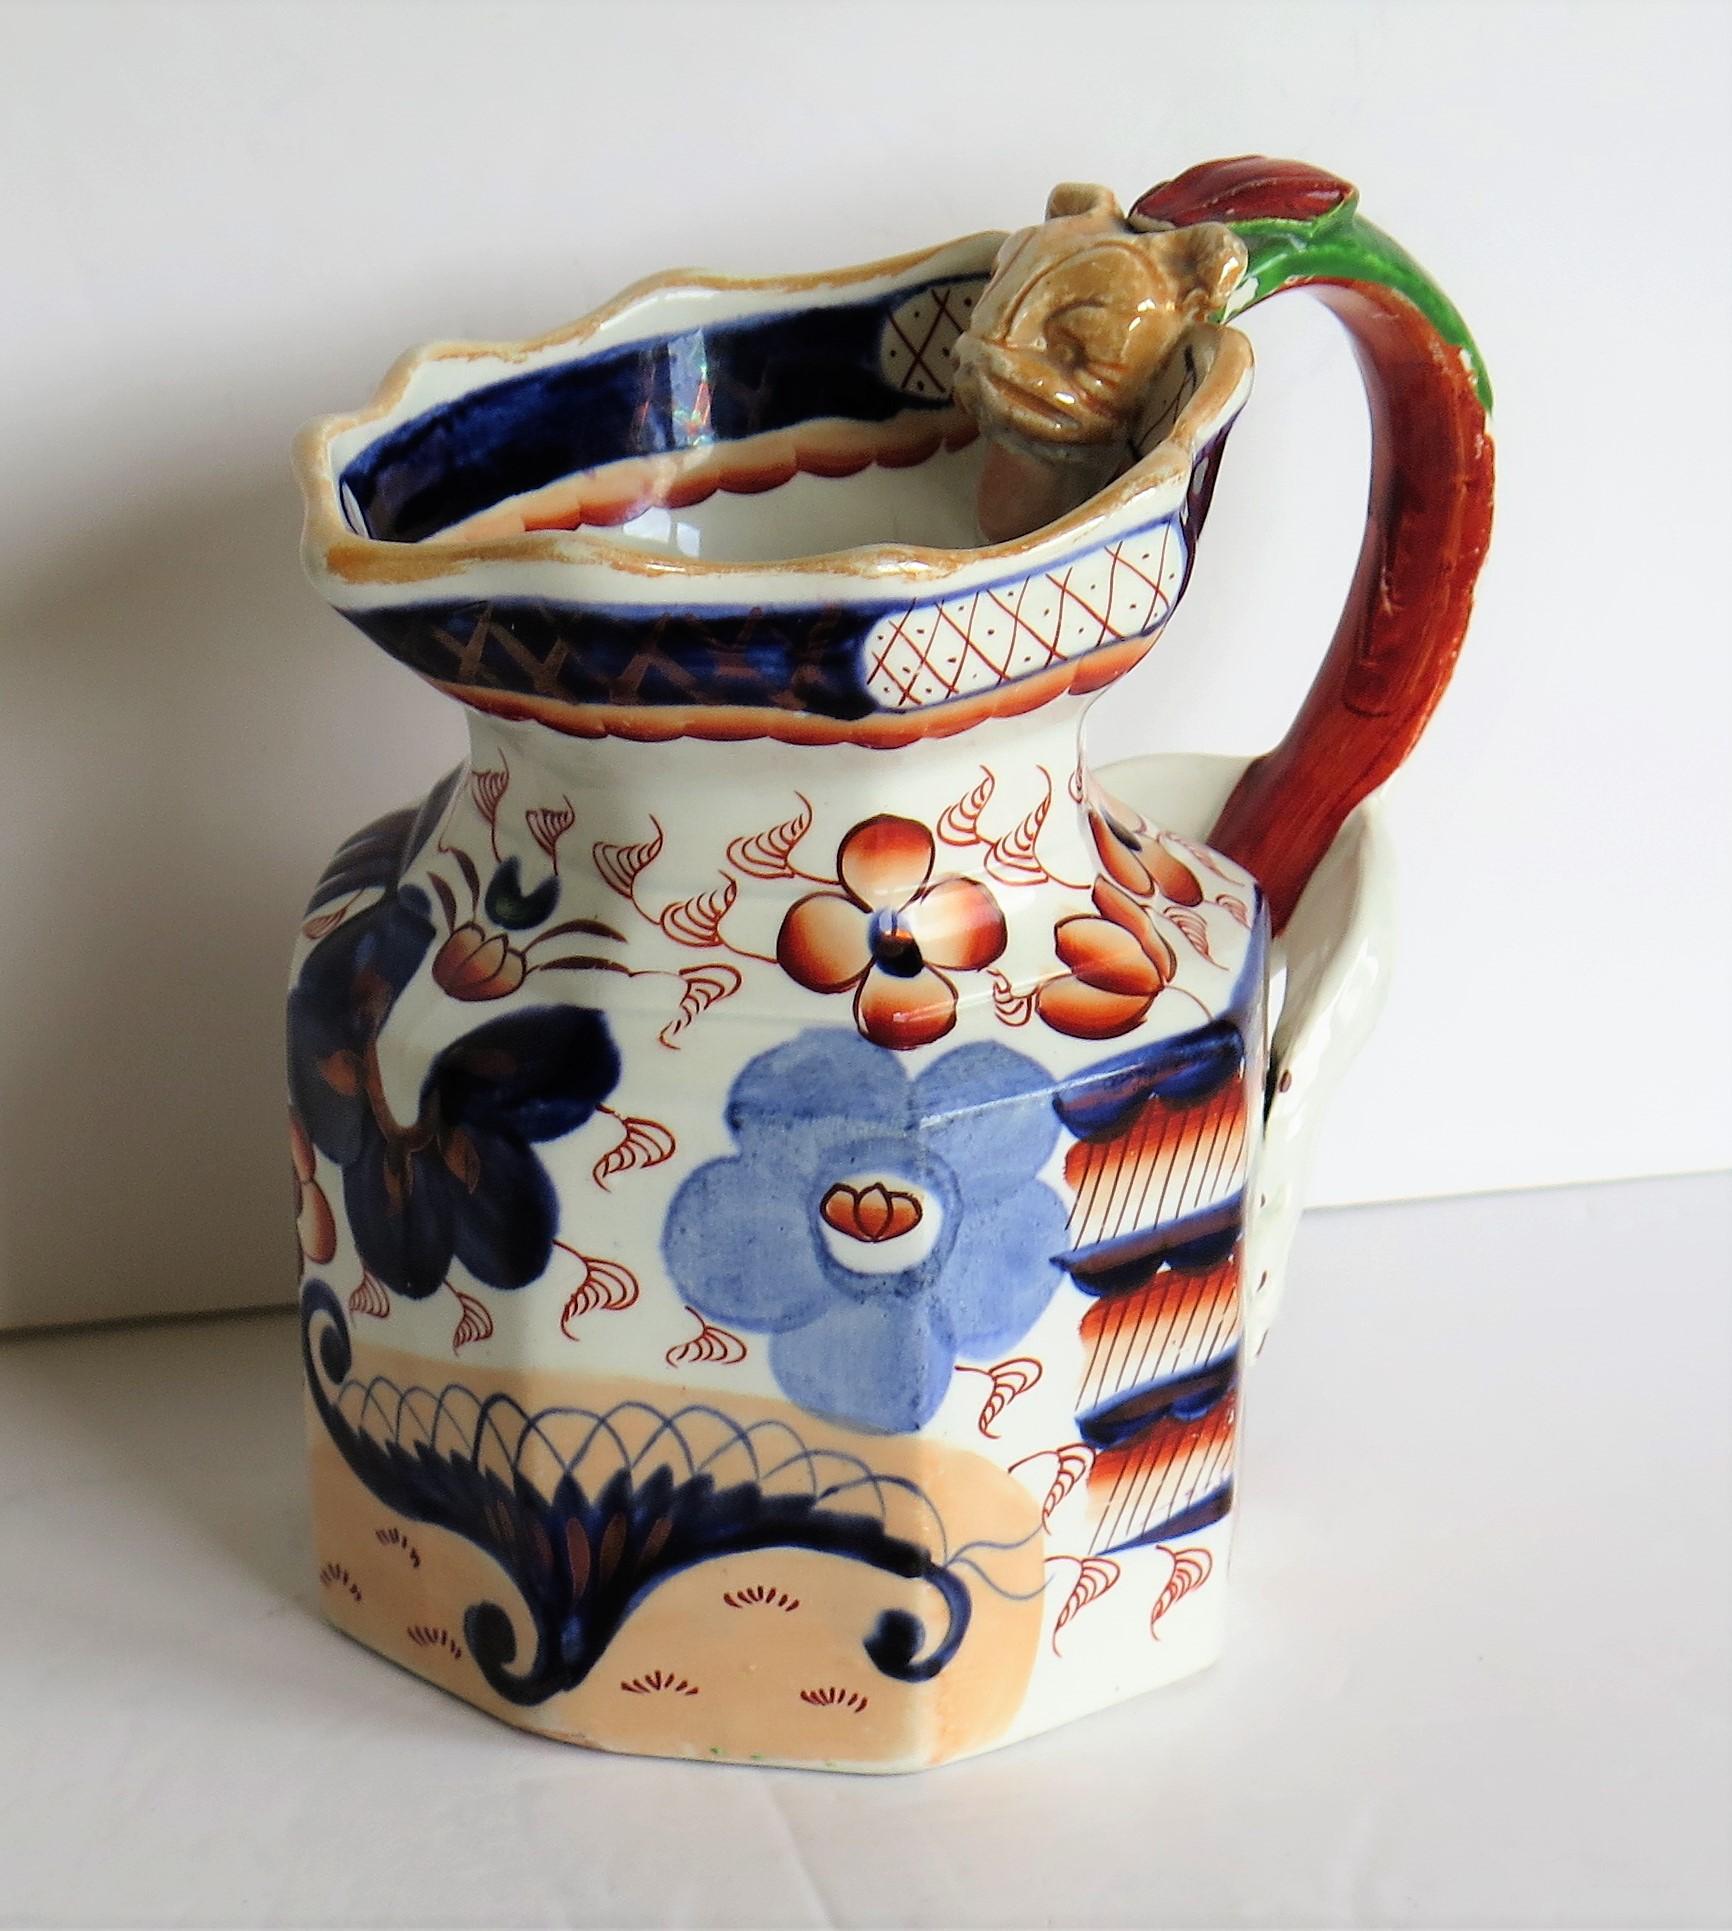 This is a good early 19th century ironstone jug or pitcher, all hand painted and gilded, made by one of the English Staffordshire potteries, circa 1820.

The jug is octagonal in shape with a very good dragon shaped loop handle, very much in the